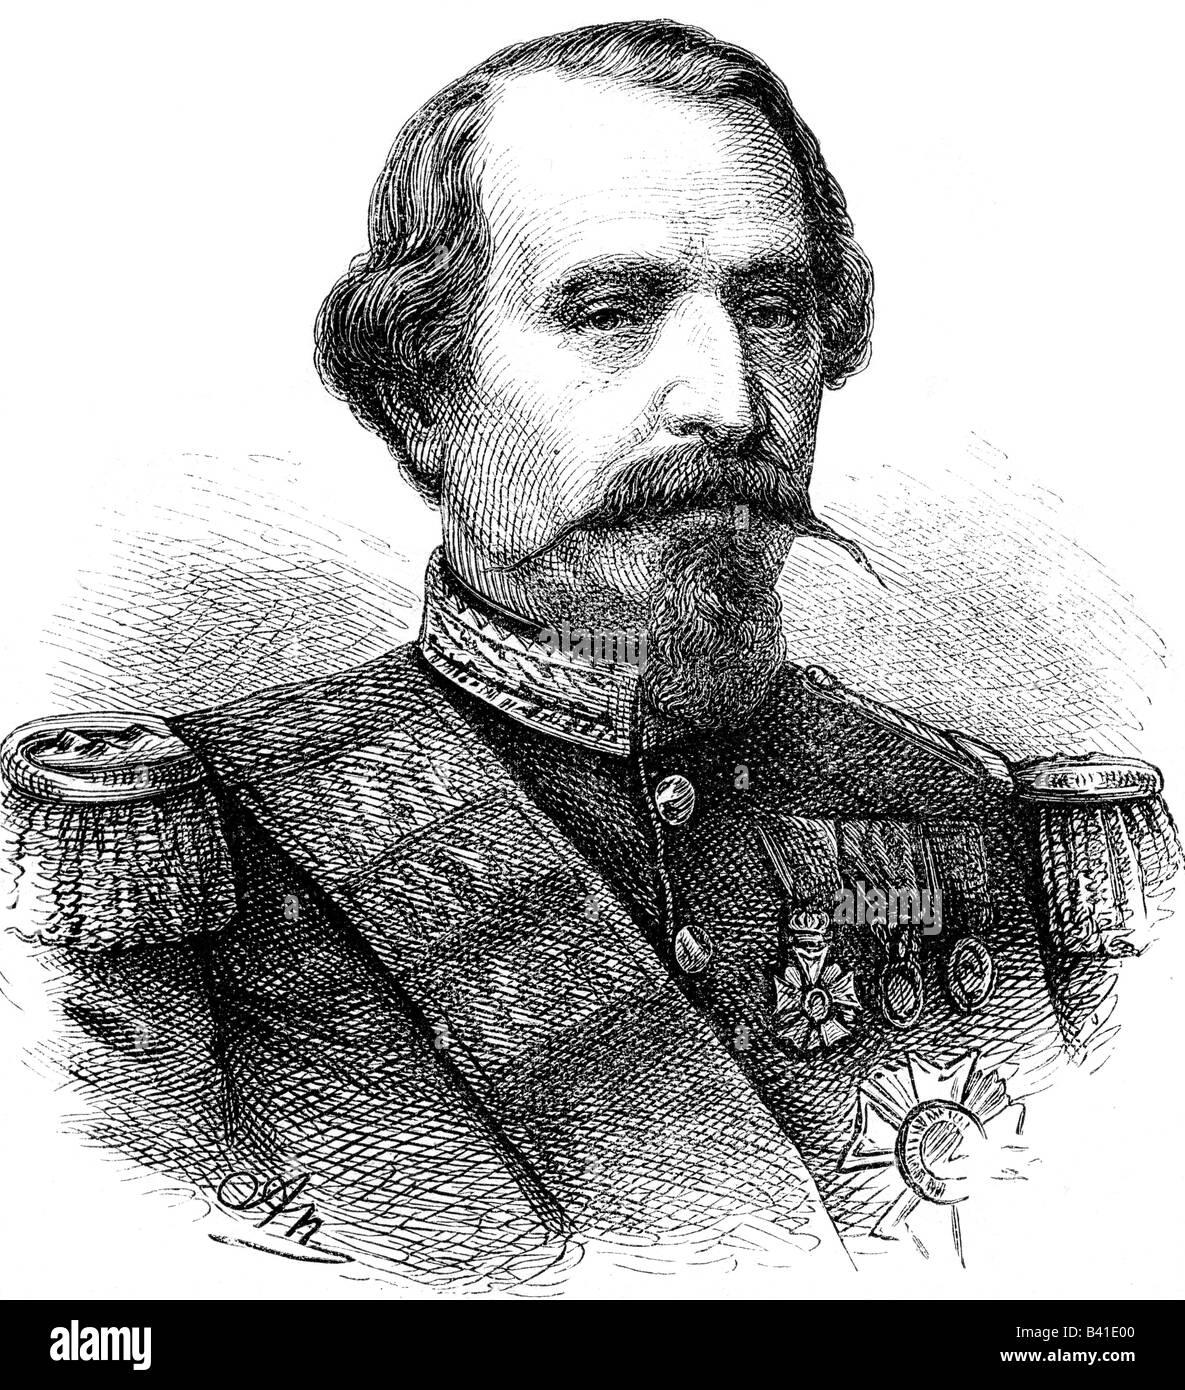 Napoleon III, 20.4.1808 - 9.1.1873, Emperor of the French 2.12.1852 - 2.9.1870, portrait, wood engraving by Adolf Neumann, 19th century, Stock Photo